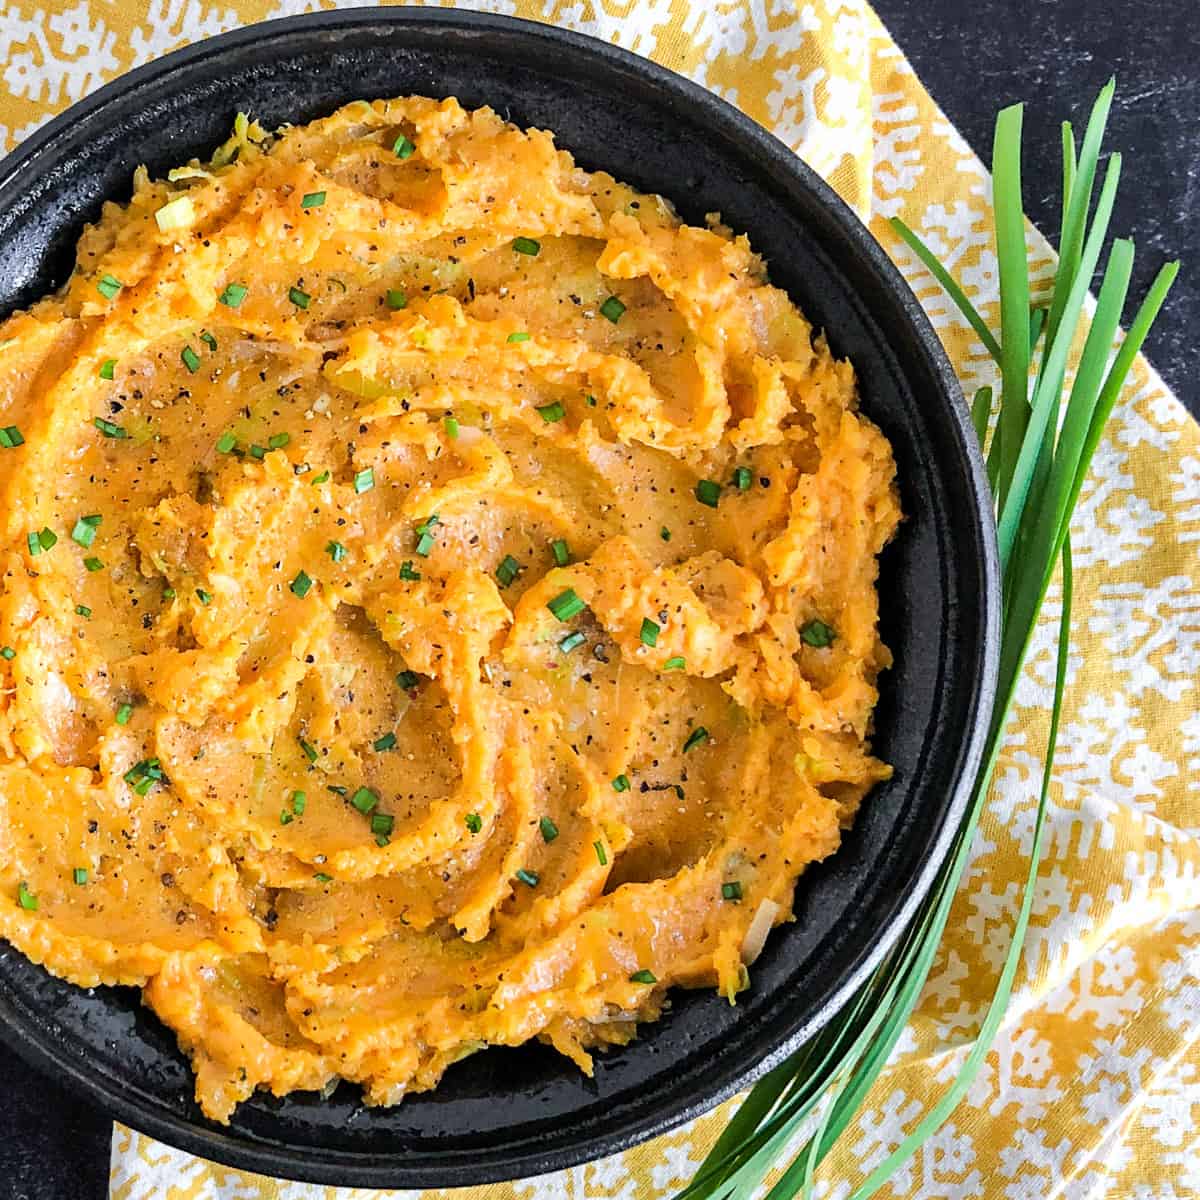 Savory Sweet Potato Mash in a black bowl garnished with fresh chives.